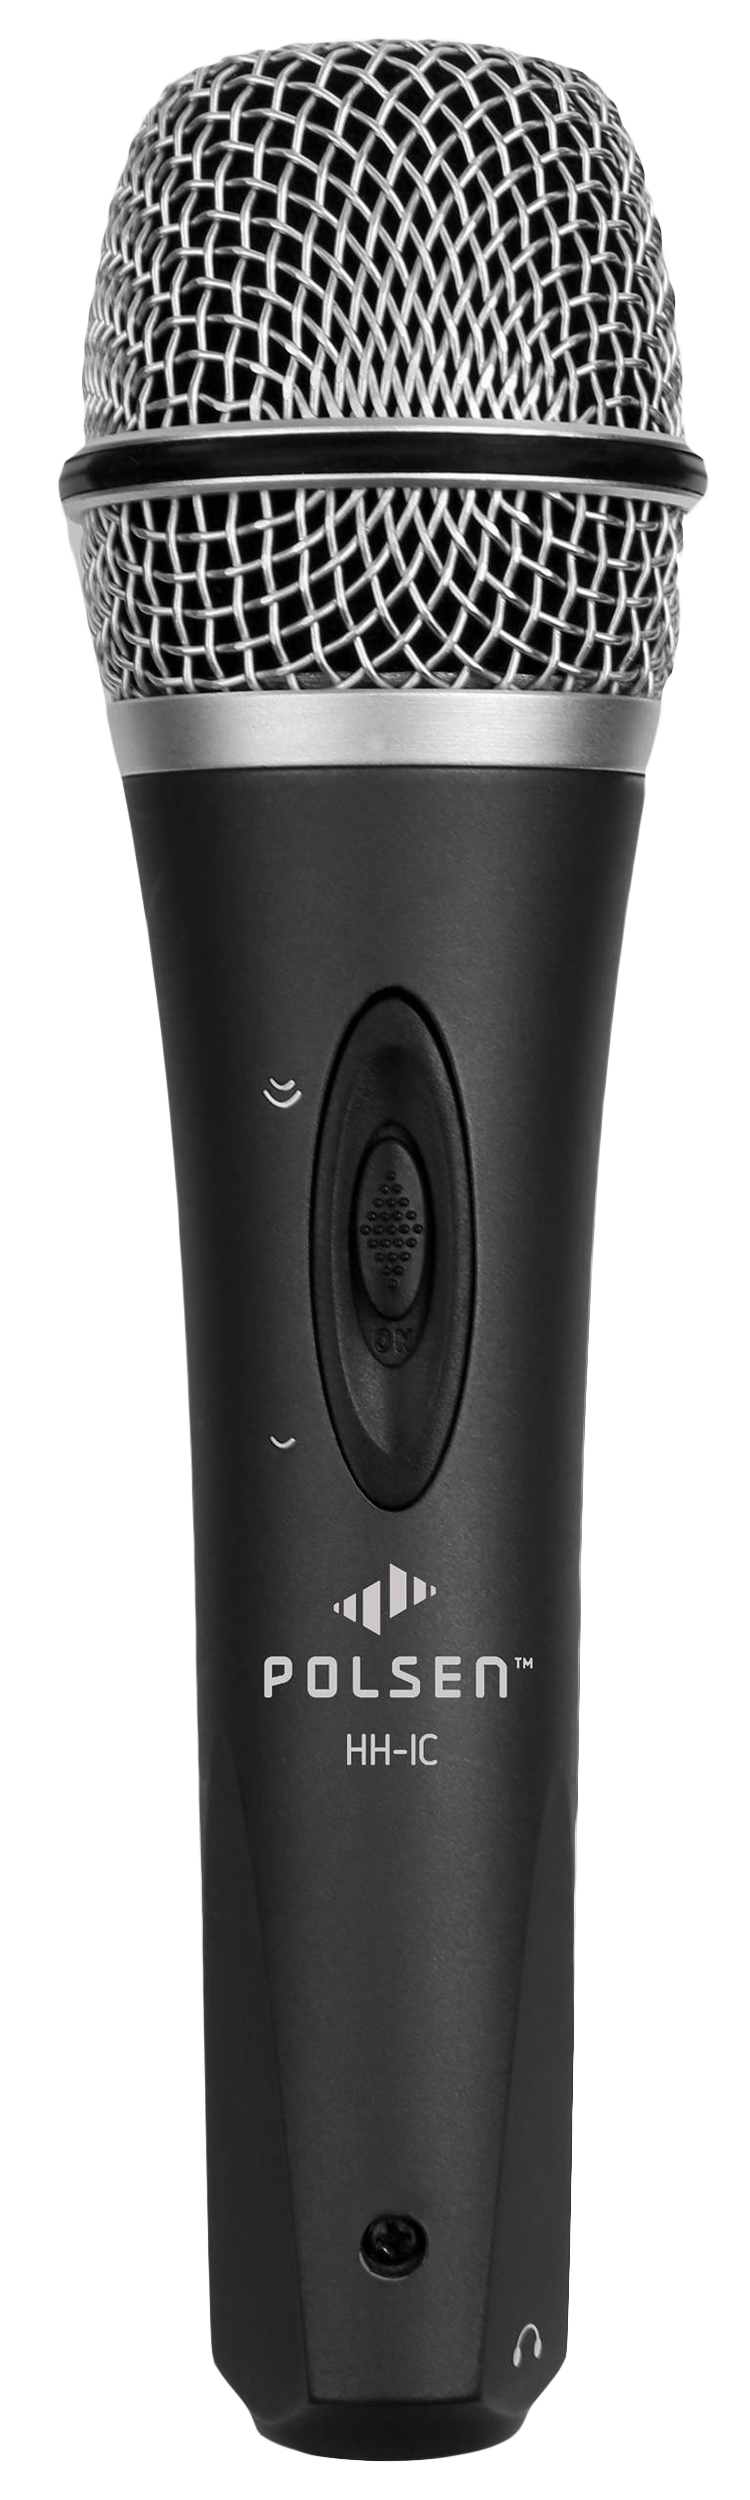 Microphone PNG - 17100